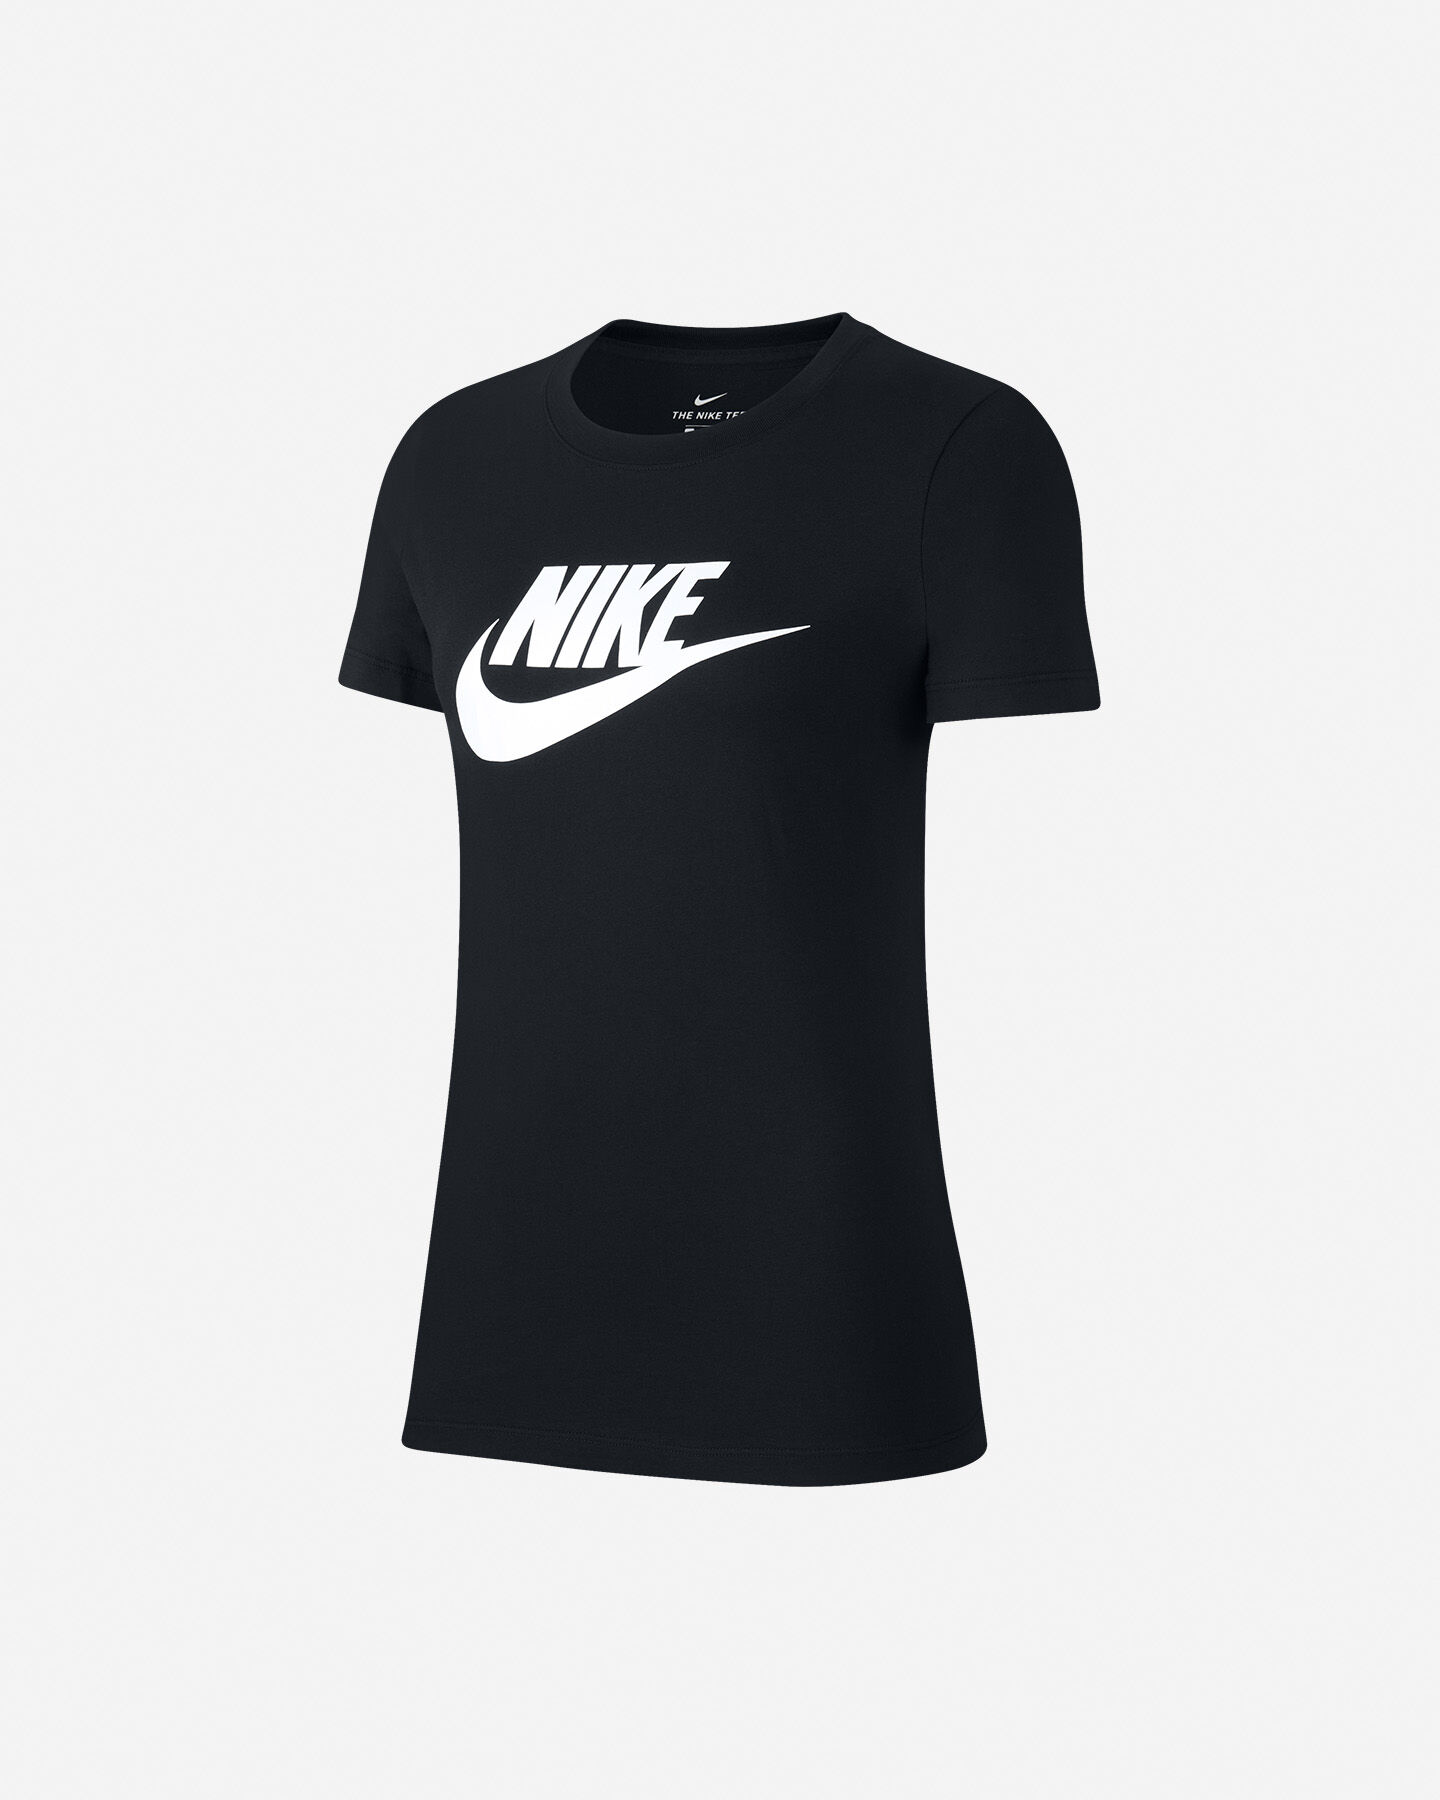  T-Shirt NIKE JERSEY BLOGO W S2015204 scatto 5